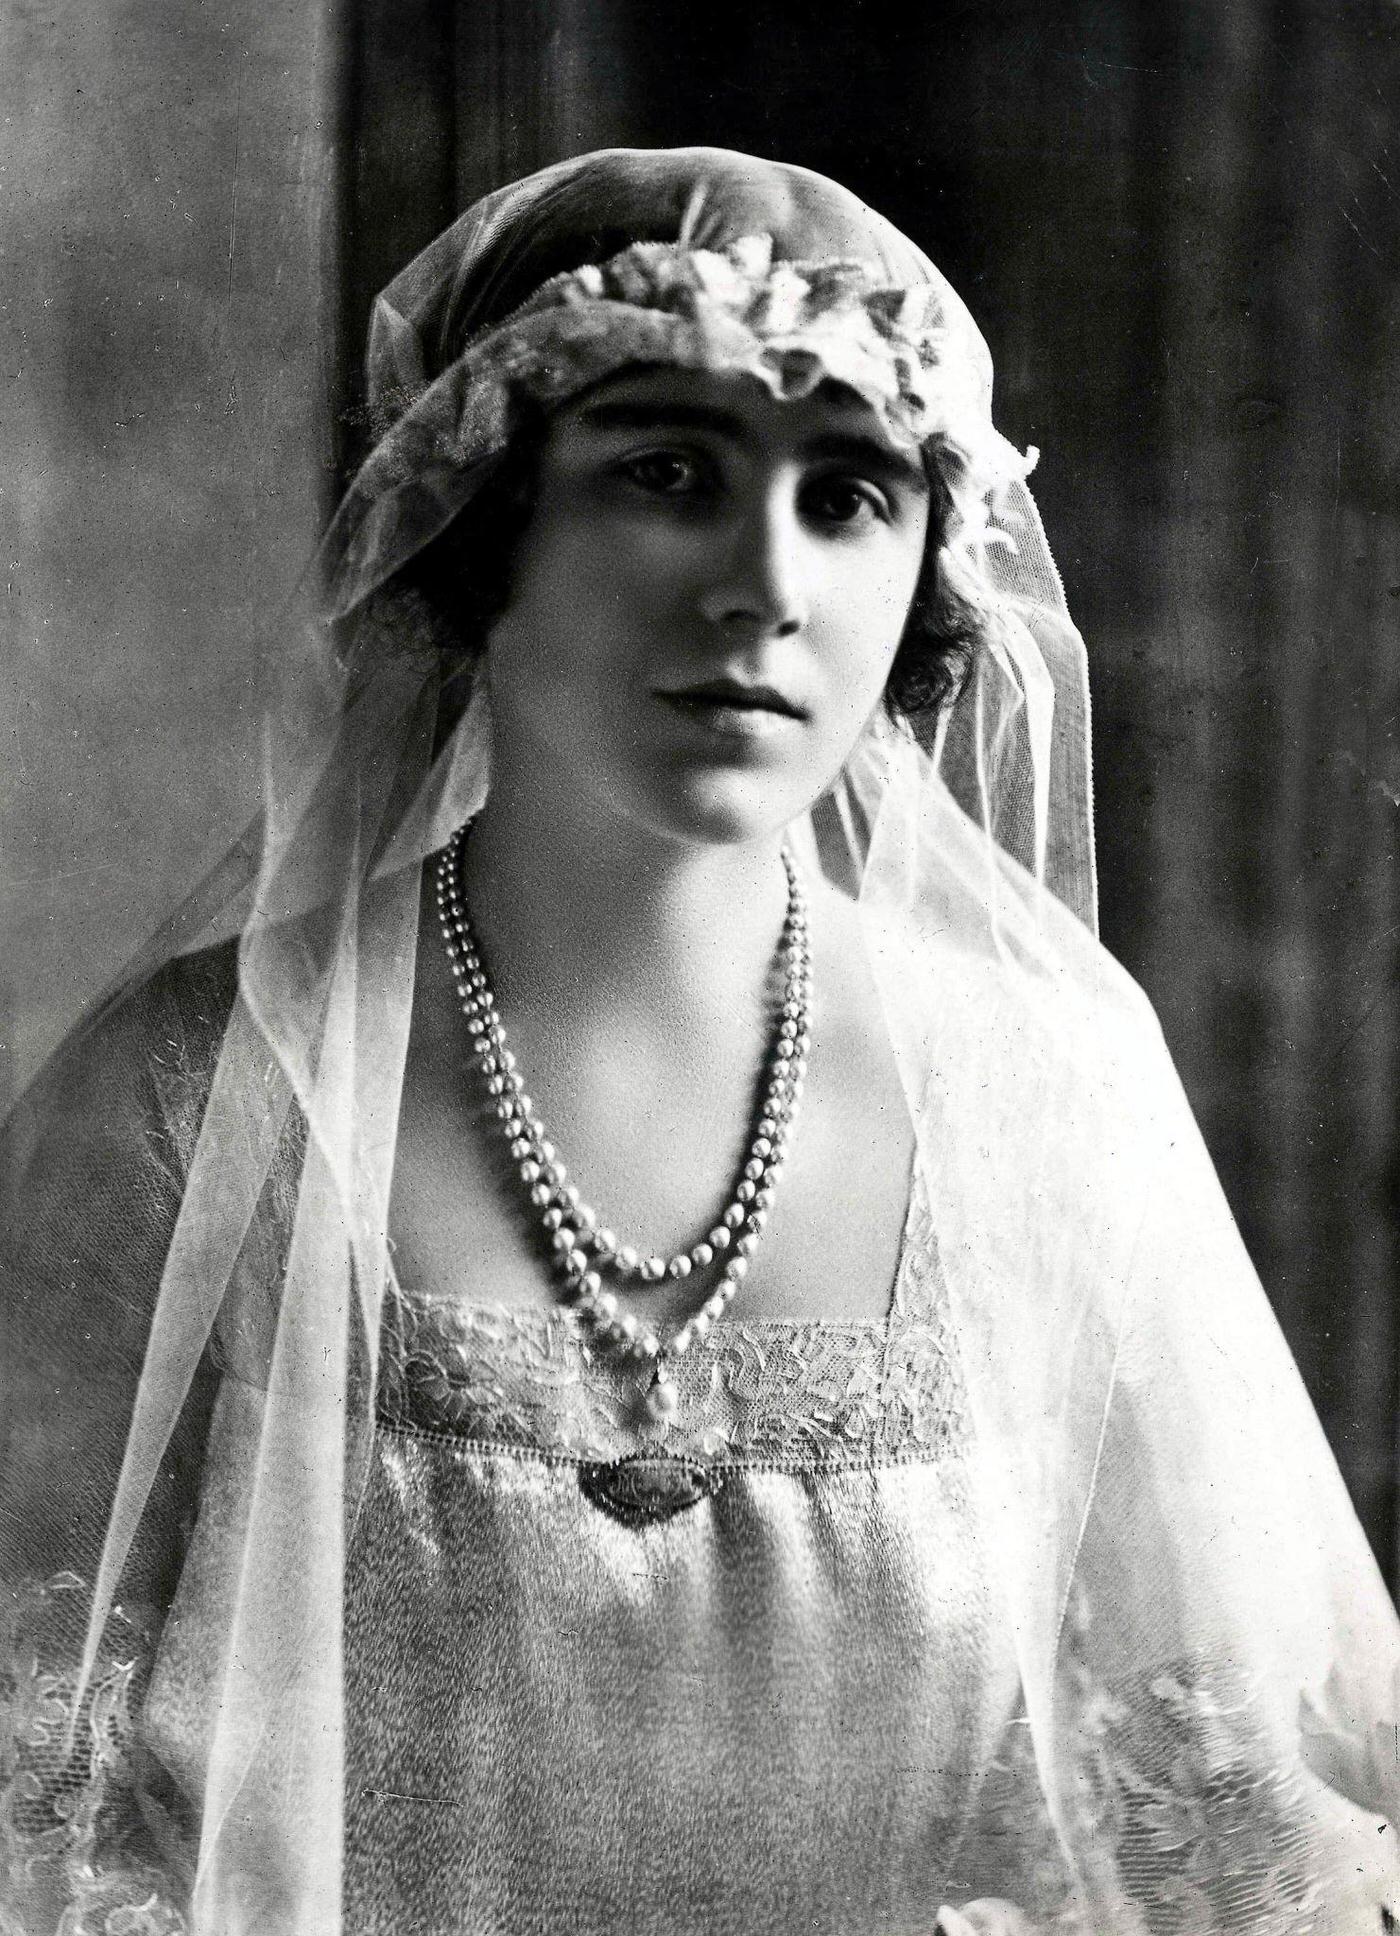 The Queen Mother pictured as a bridesmaid for the wedding of the Princess Royal when she was the Duchess of York, 1922.